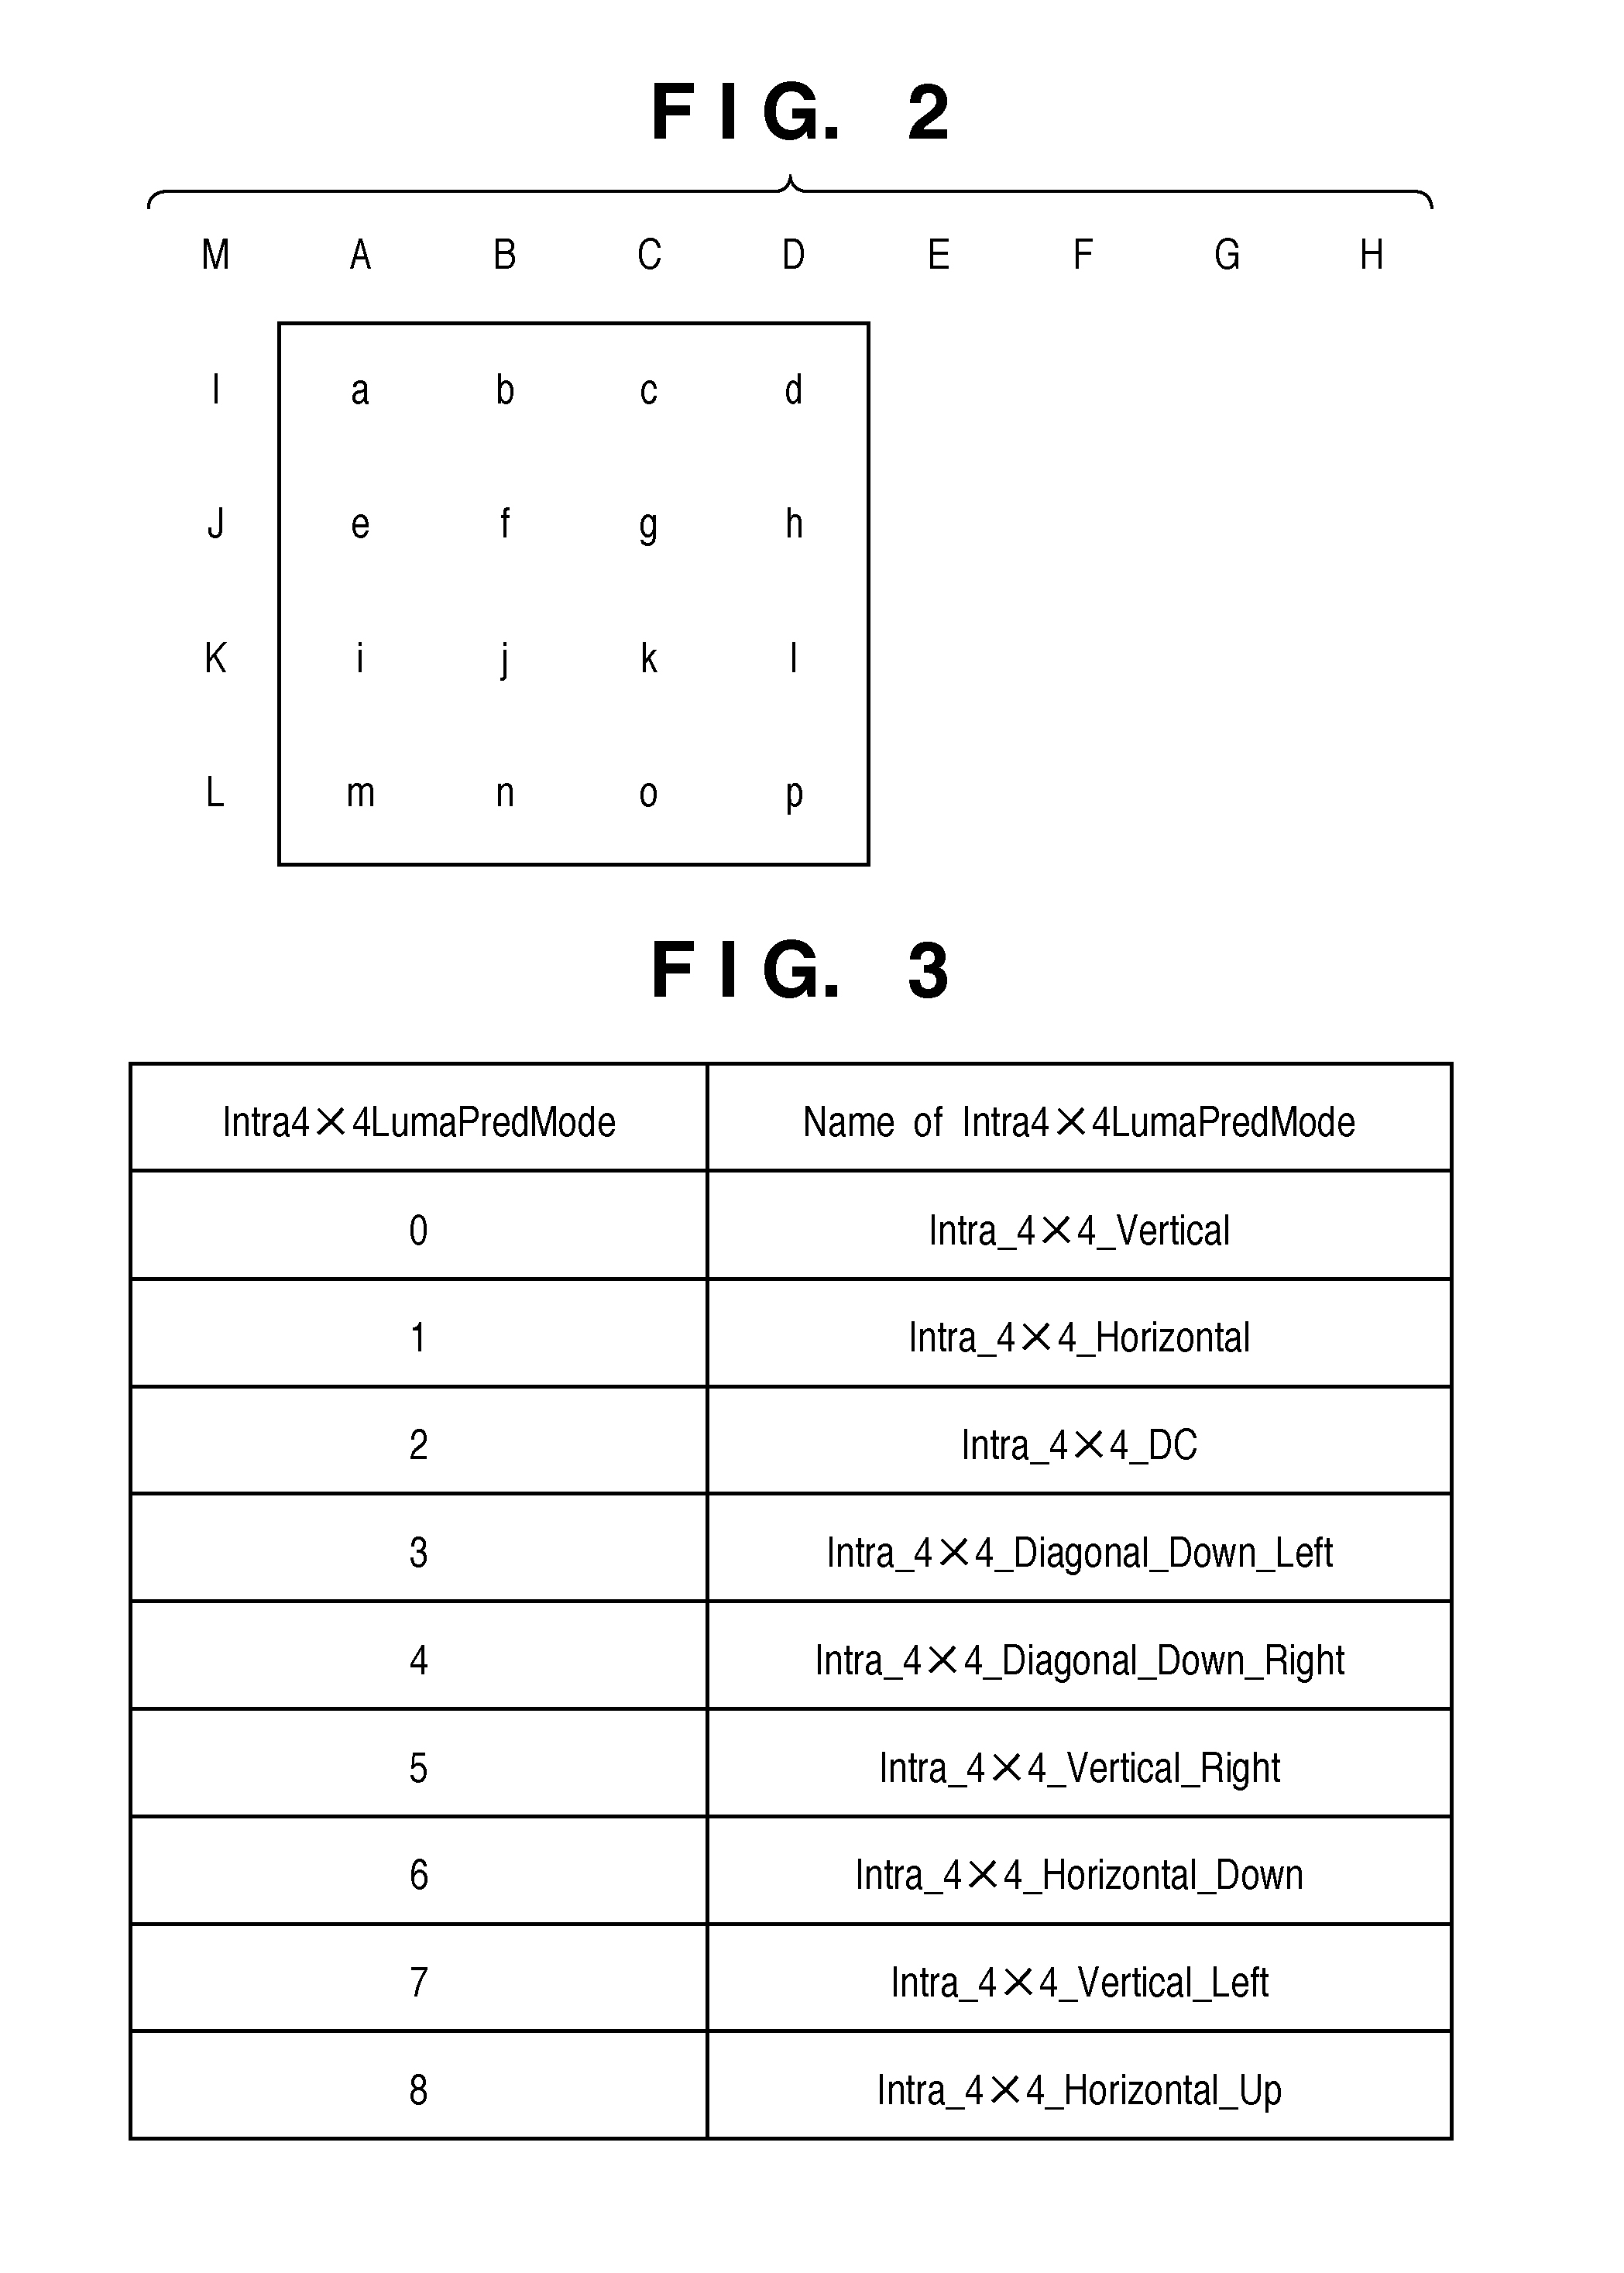 Image coding apparatus, control method therefor and computer program